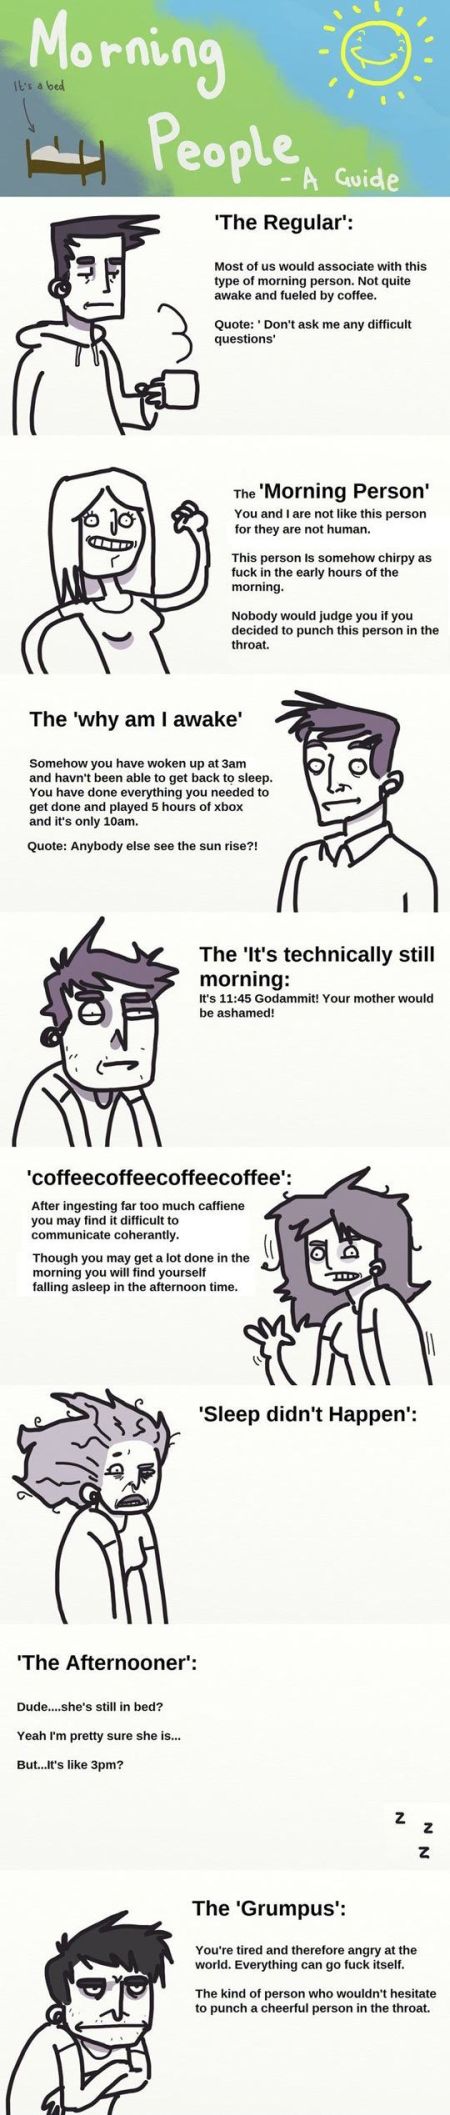 guide to morning people